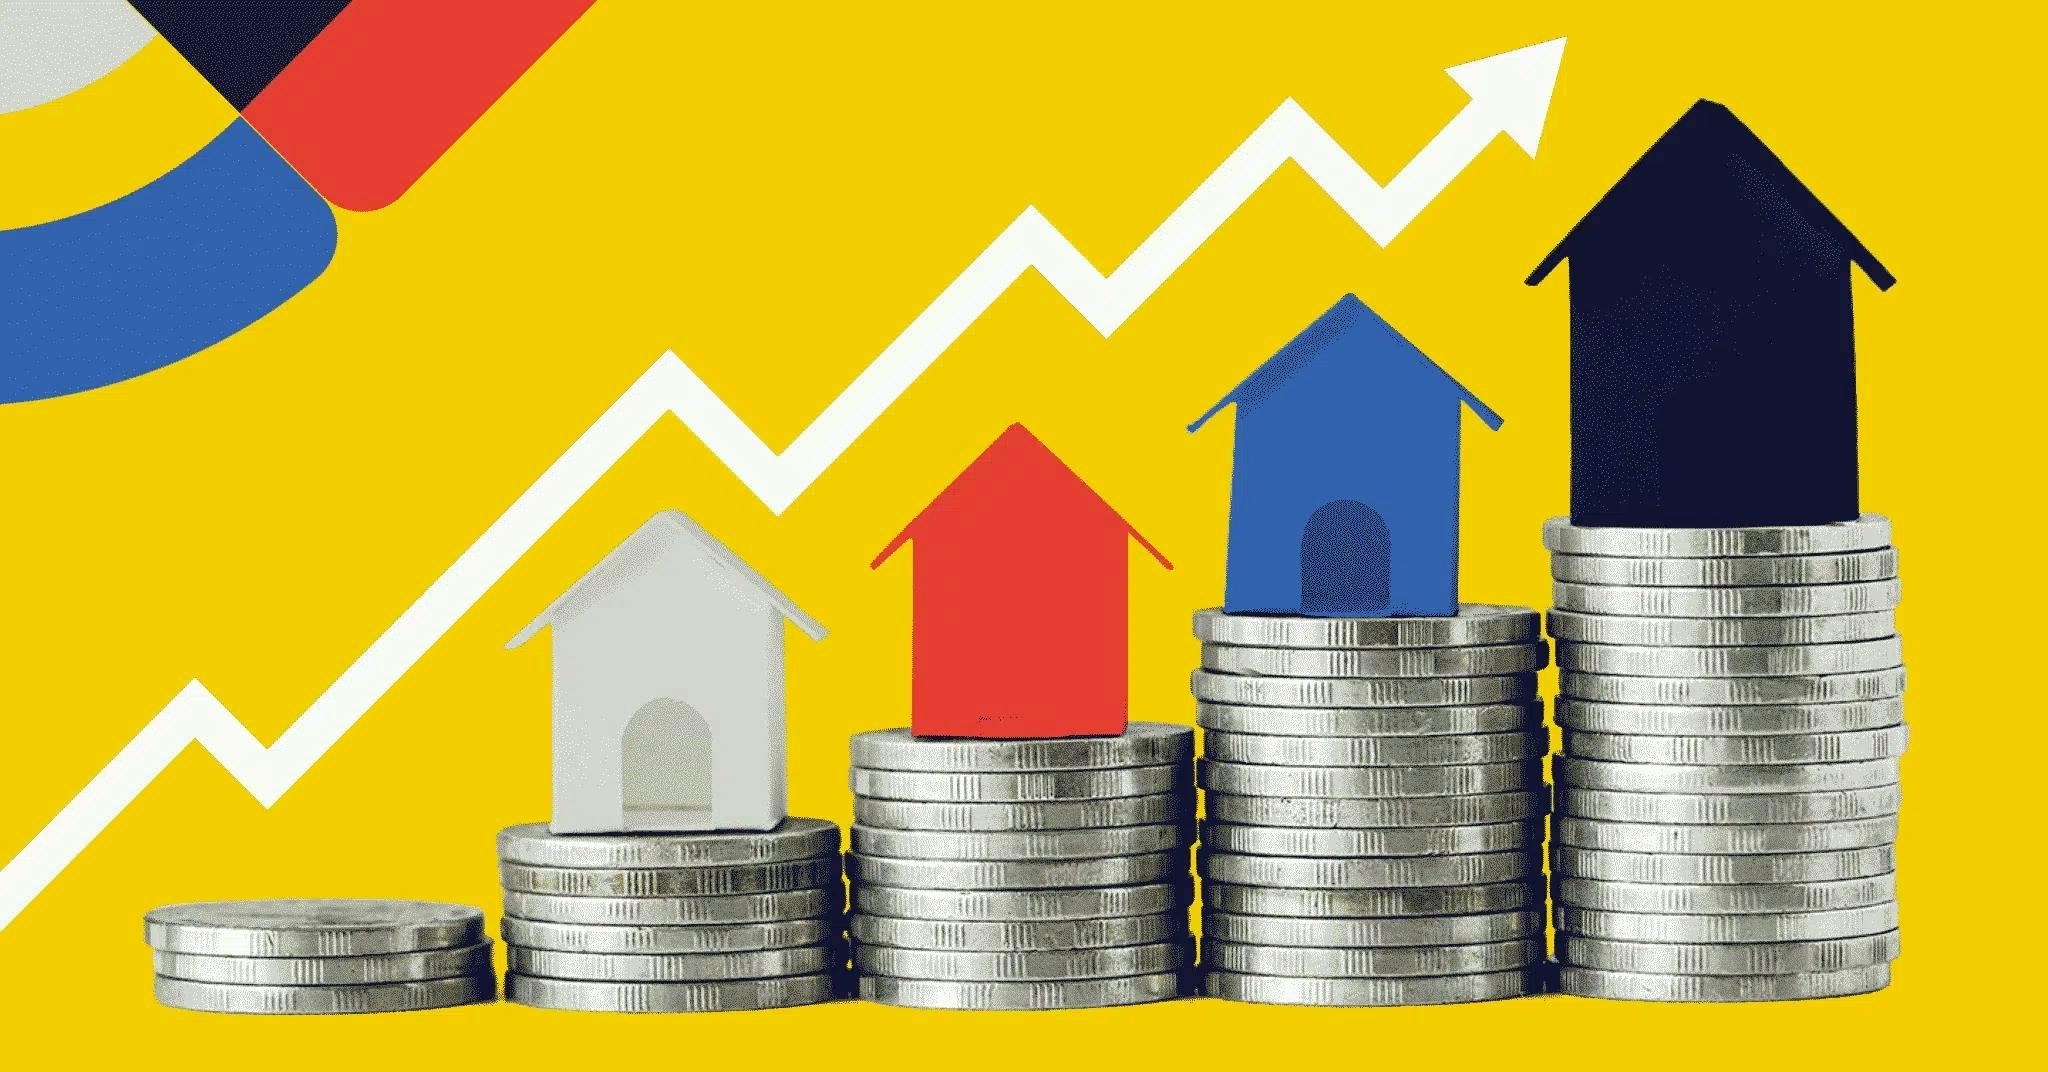 Illustration of coin stacks in ascending order, symbolizing financial growth, with homes perched atop the highest stack. Yellow background.